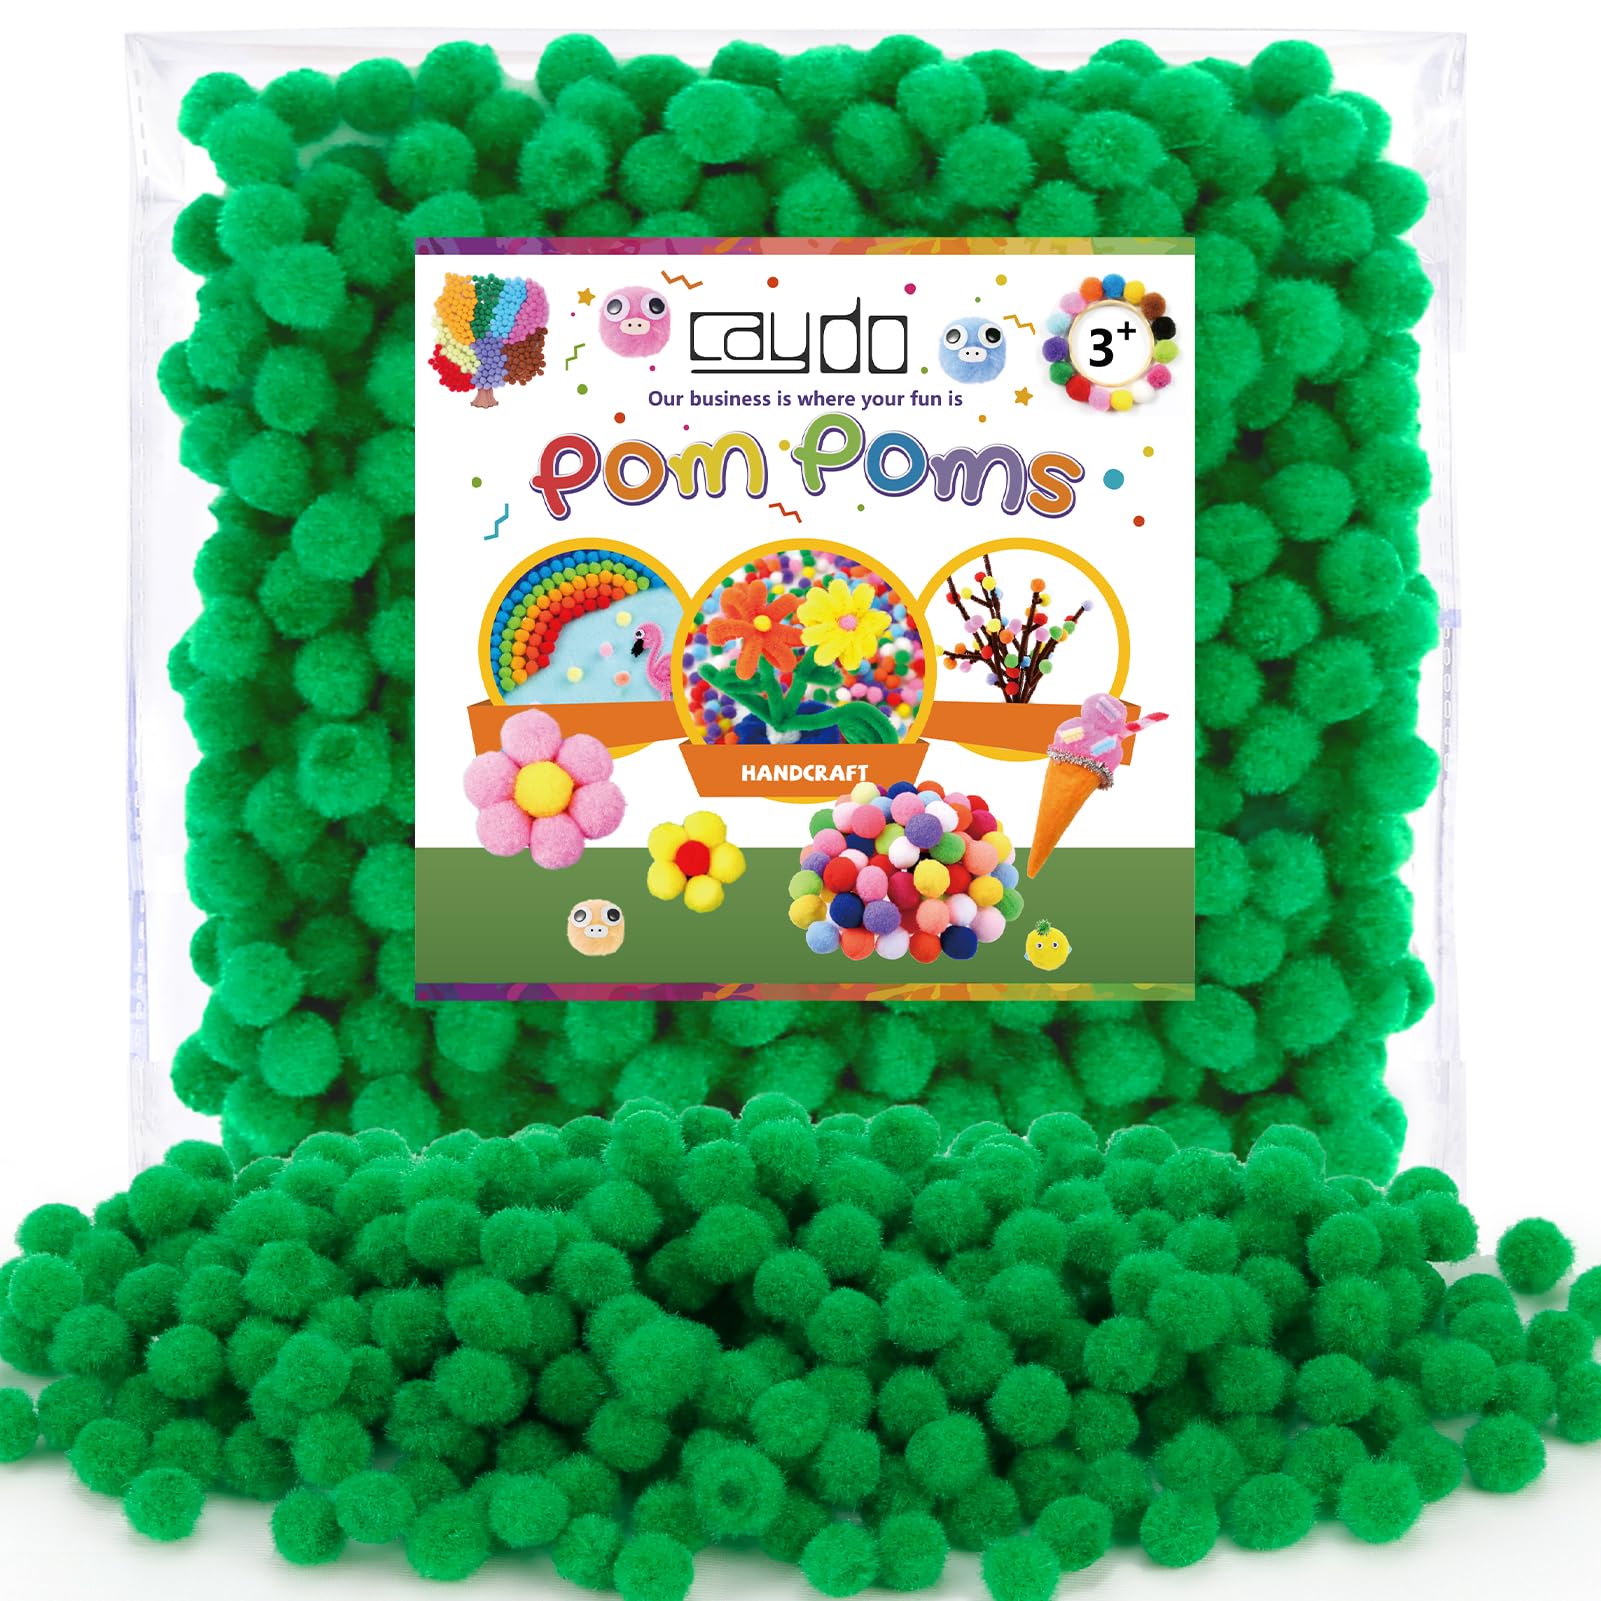 [250 Pcs ] 150 1 inch Green Craft Pom Poms + 100 Multicolor Pom Pom Balls, Small Pom Poms Assorted Pompoms for Crafts Projects and DIY Creative